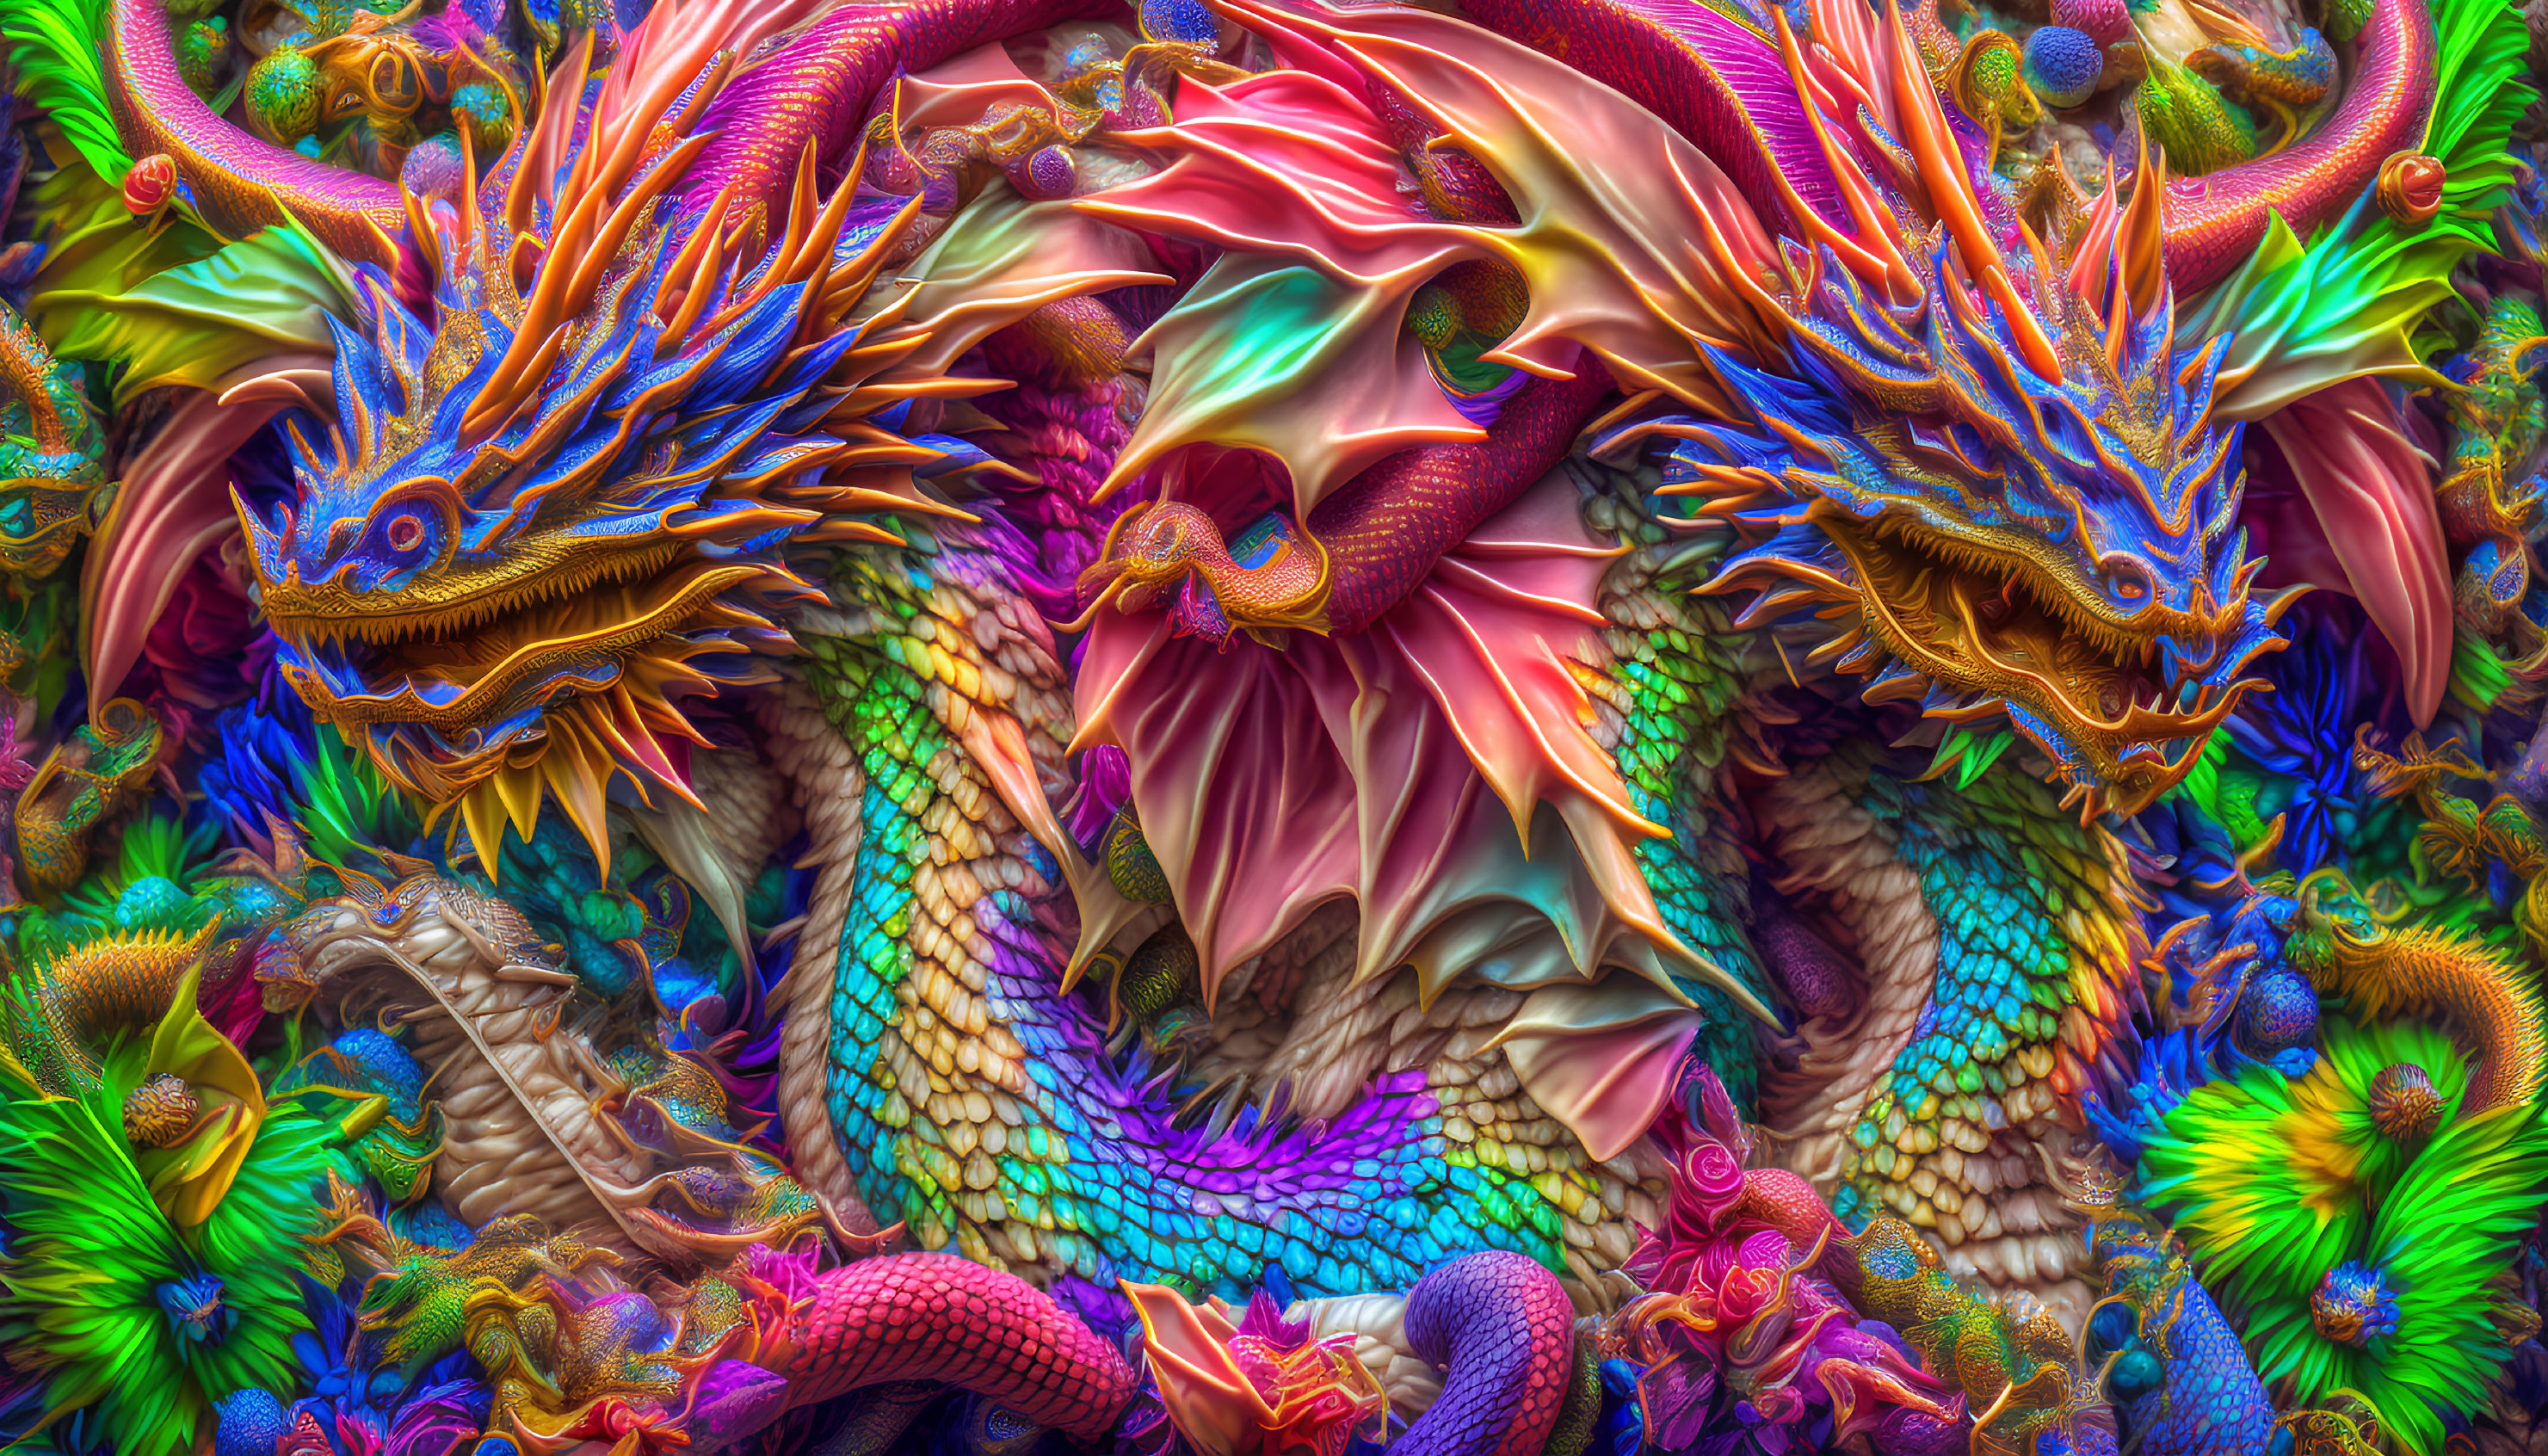 Colorful Fractal Art: Two Dragons in Neon Colors